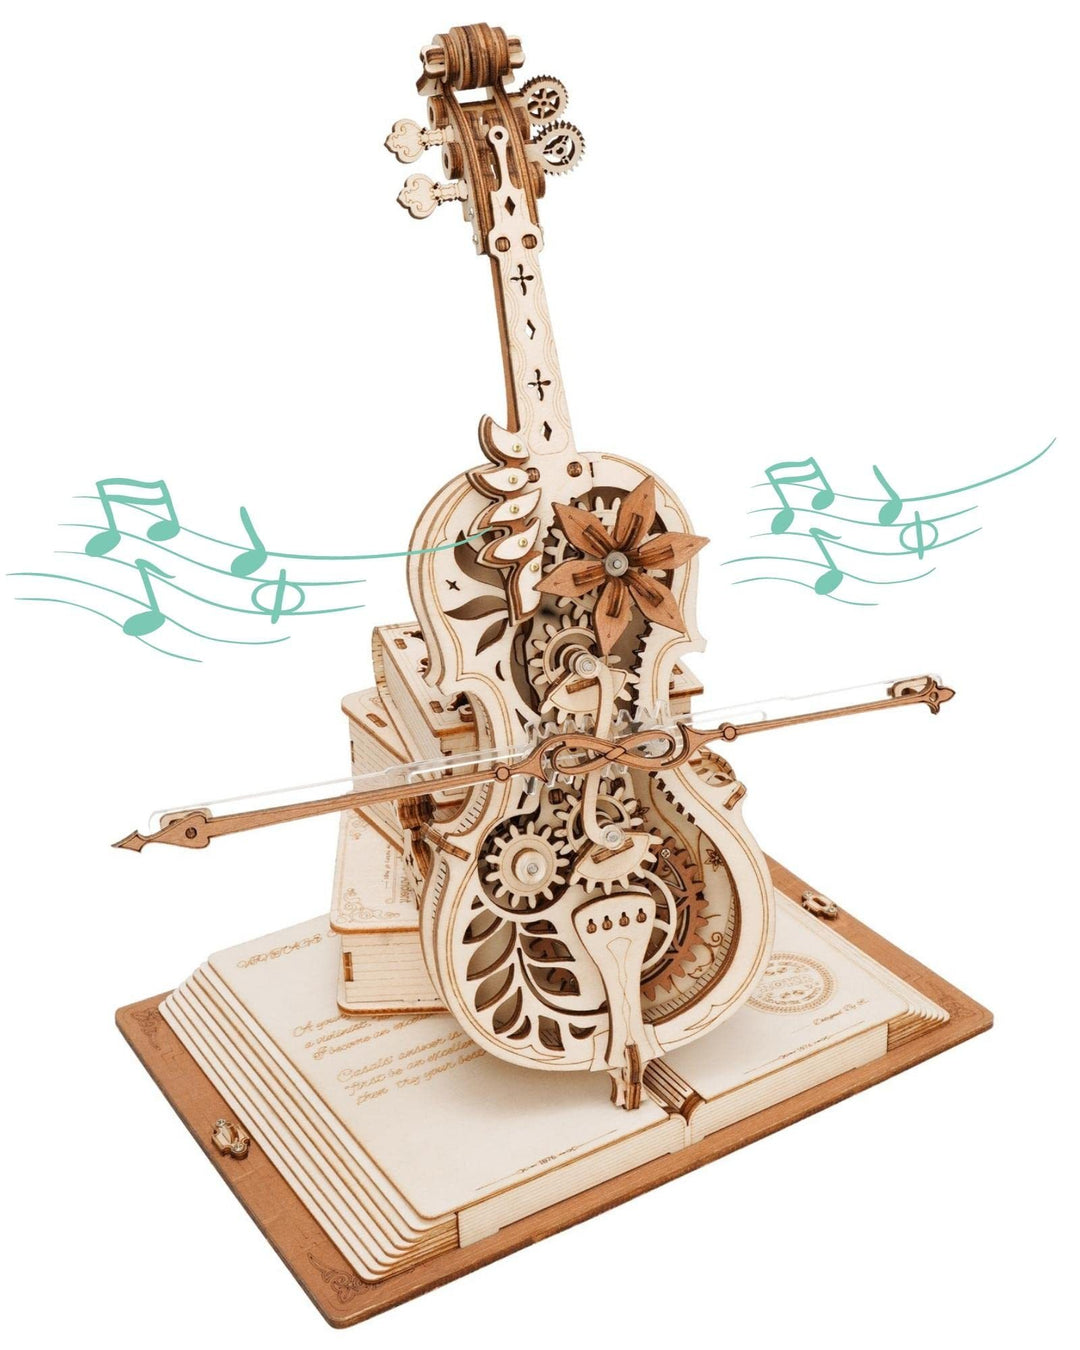 RoboTime Rokr Magic Cello Mechanical Music Box Movable STEM Funny Creative Toys for Child Girls 3D Holz Puzzle Amk63